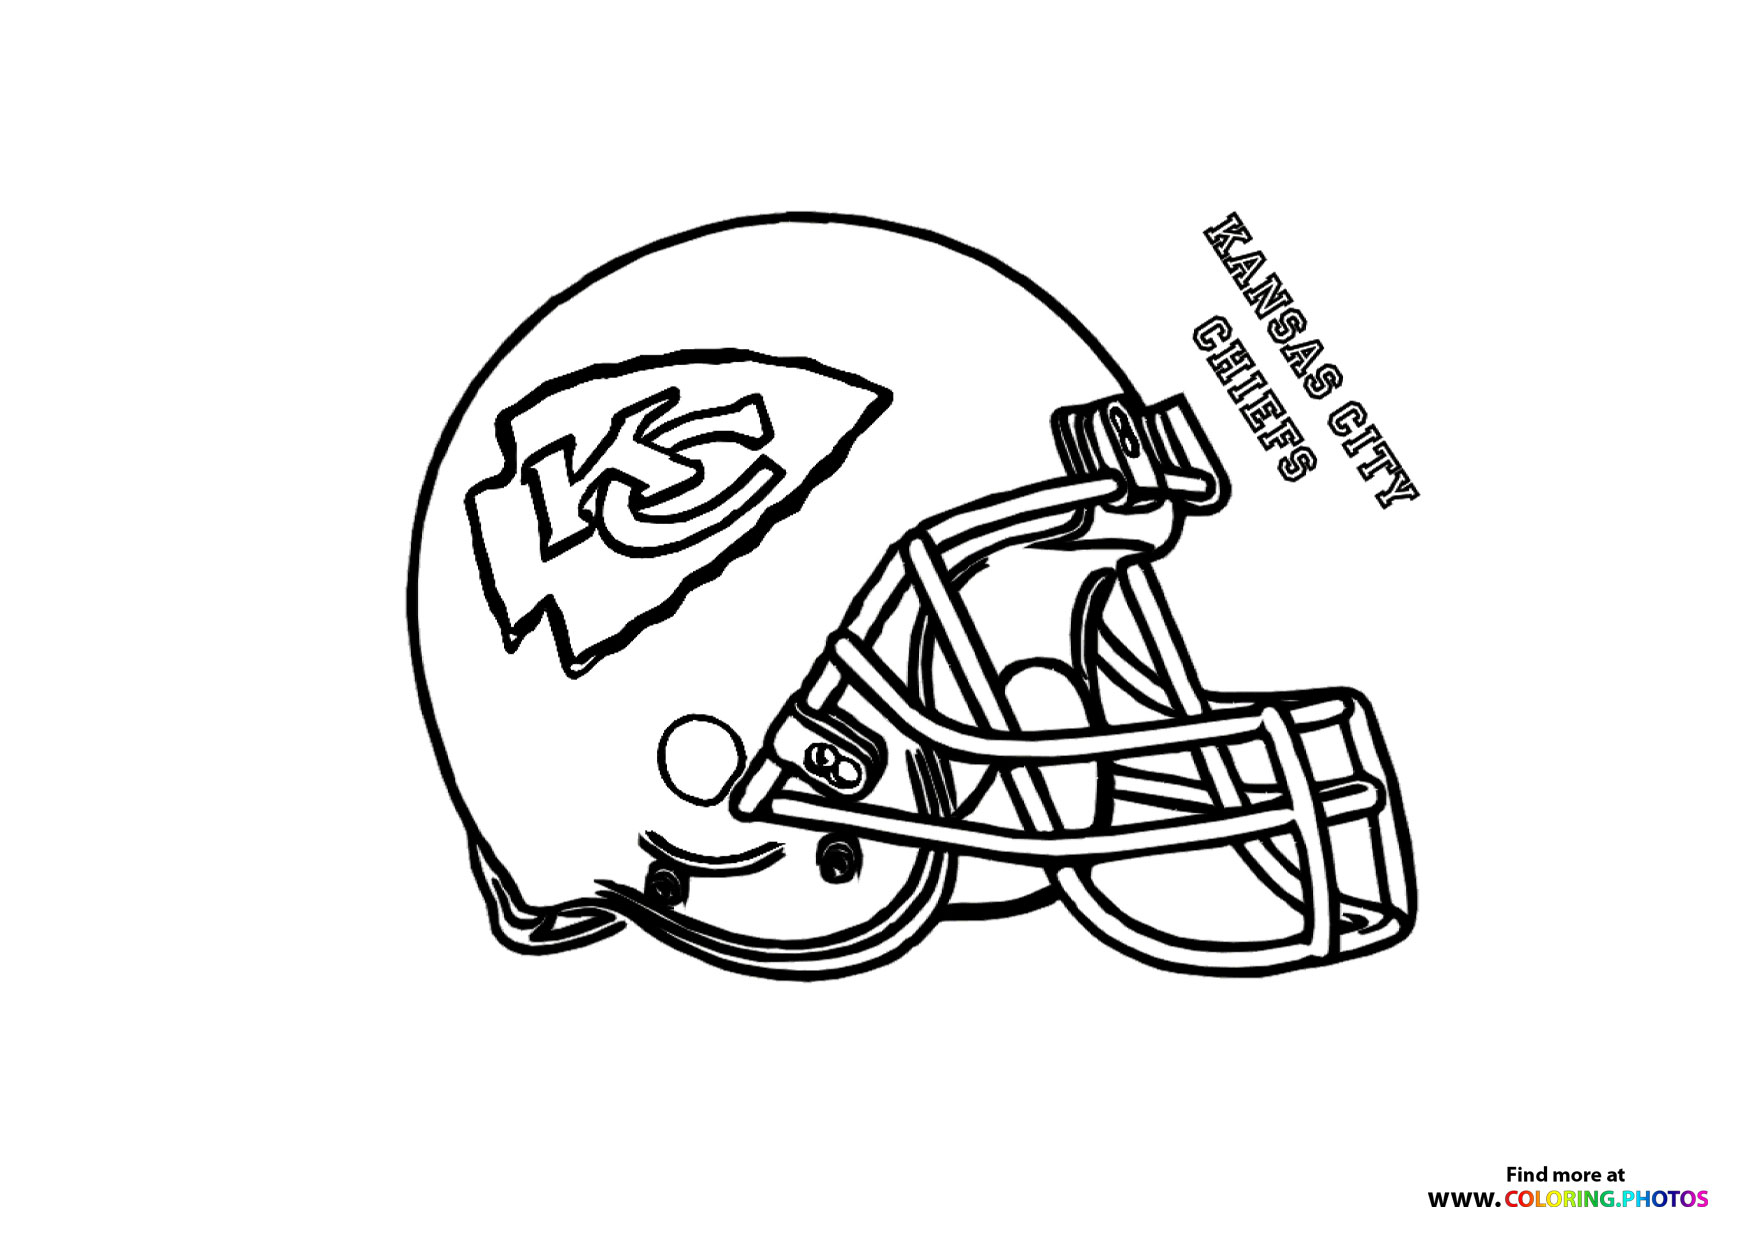 Kansas City Chiefs NFL helmet - Coloring Pages for kids